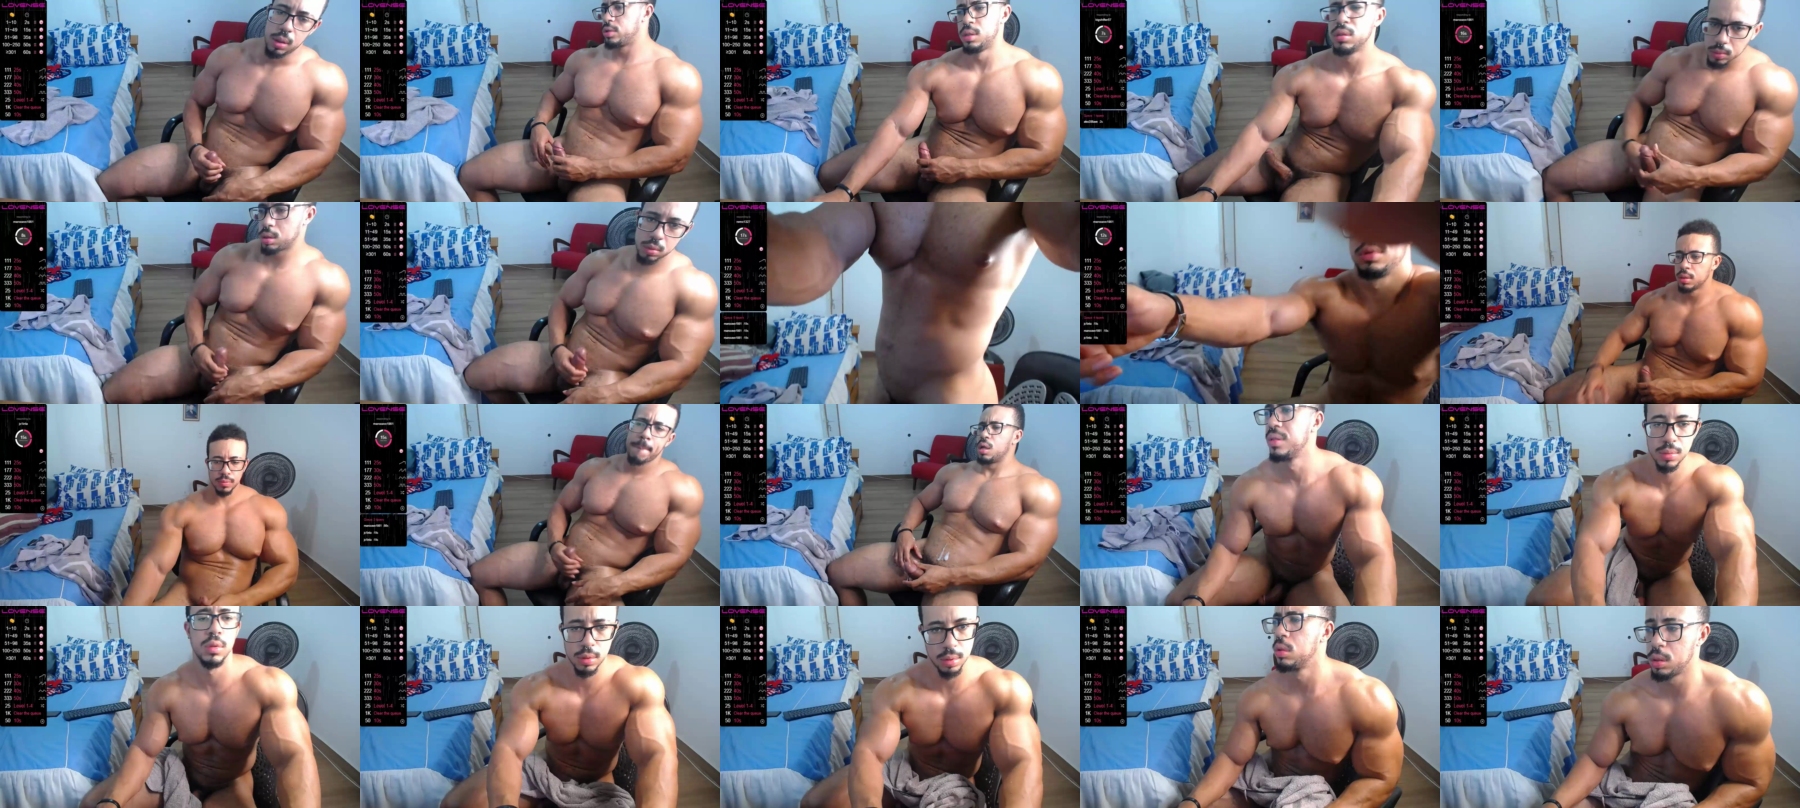 Mikehotk  23-10-2021 Male Topless